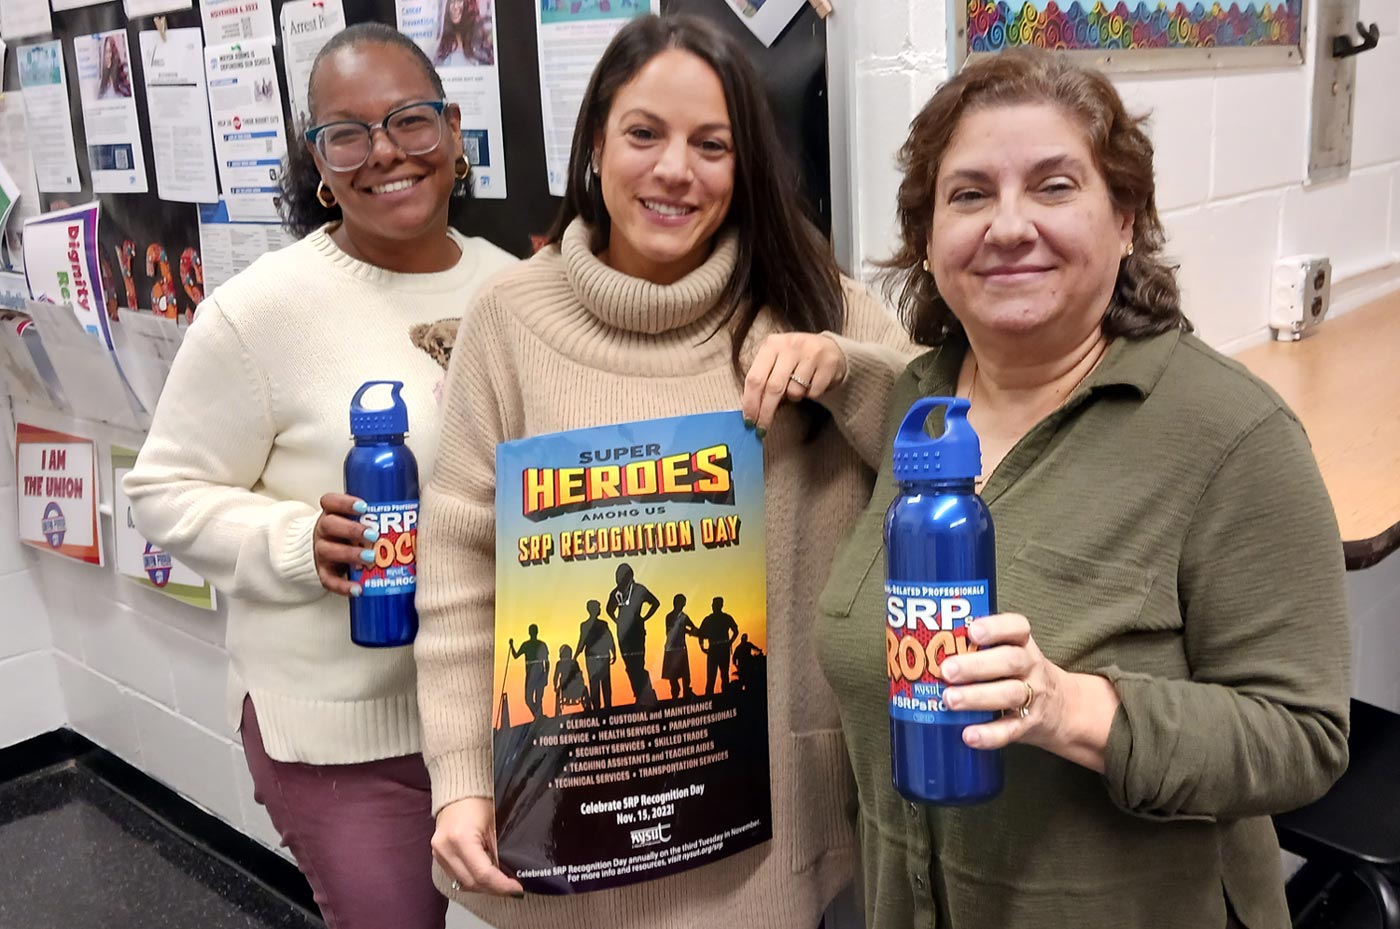 school secretaries, from left, Laura Familia, Dana Gottsegen and Wendy Guardion, stand together smiling, Laura Familia and Wendy Guardion hold water bottles with SRP Rocks stickers, while Dana Gottsegen holds a poster that reads "Super Heroes Among Us: SRP Recognition Day"